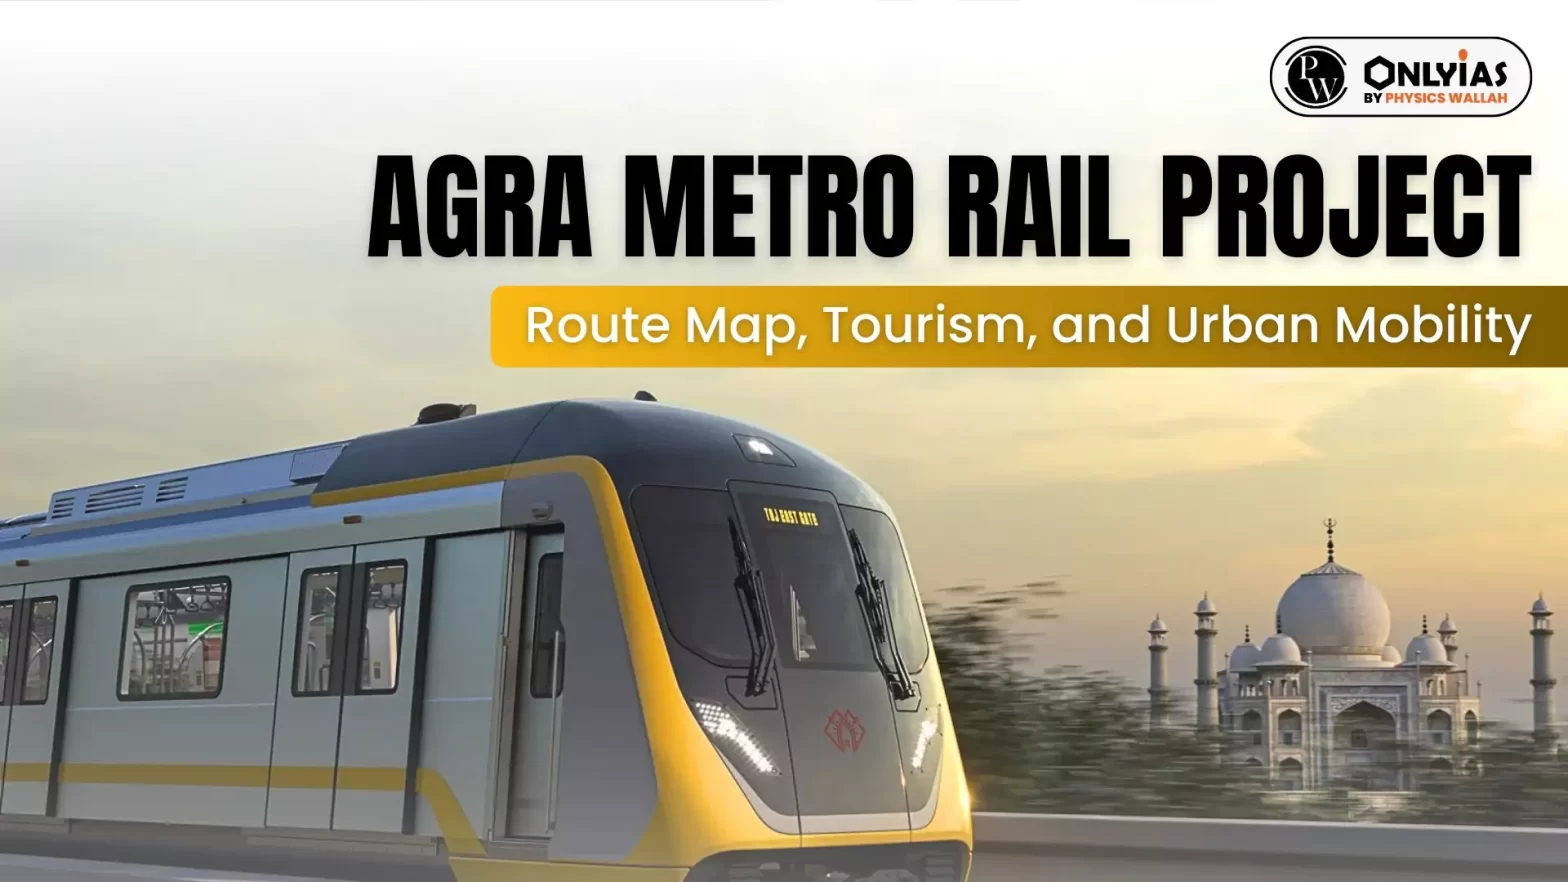 Agra Metro Rail Project: Route Map, Tourism, and Urban Mobility